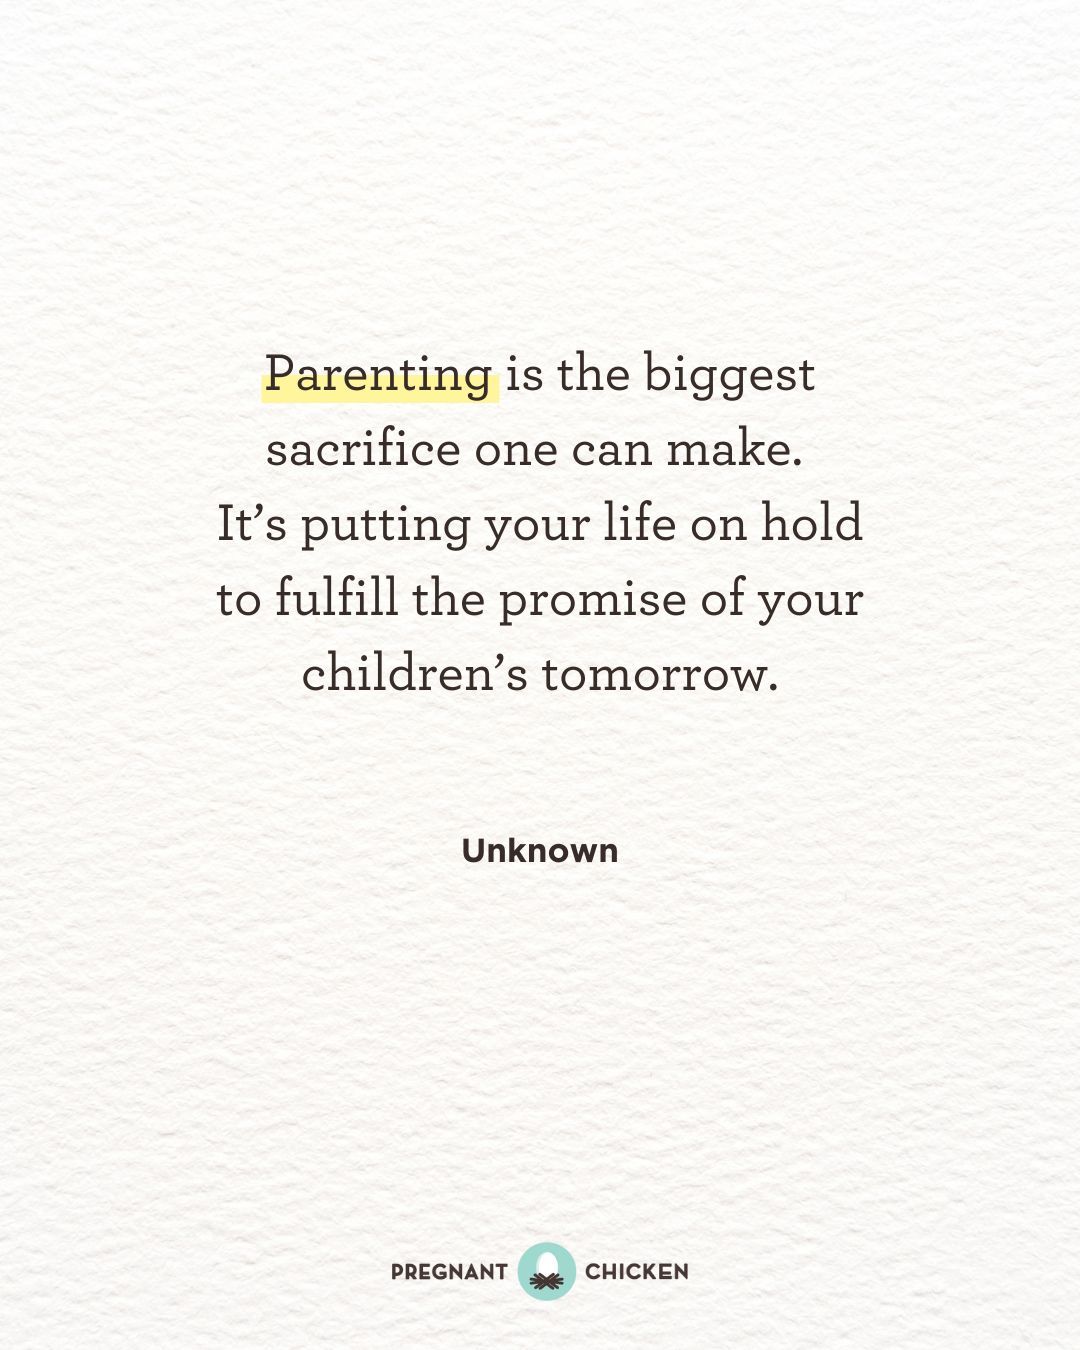 Parenting is the biggest sacrifice one can make.  It’s putting your life on hold to fulfill the promise of your children’s tomorrow.